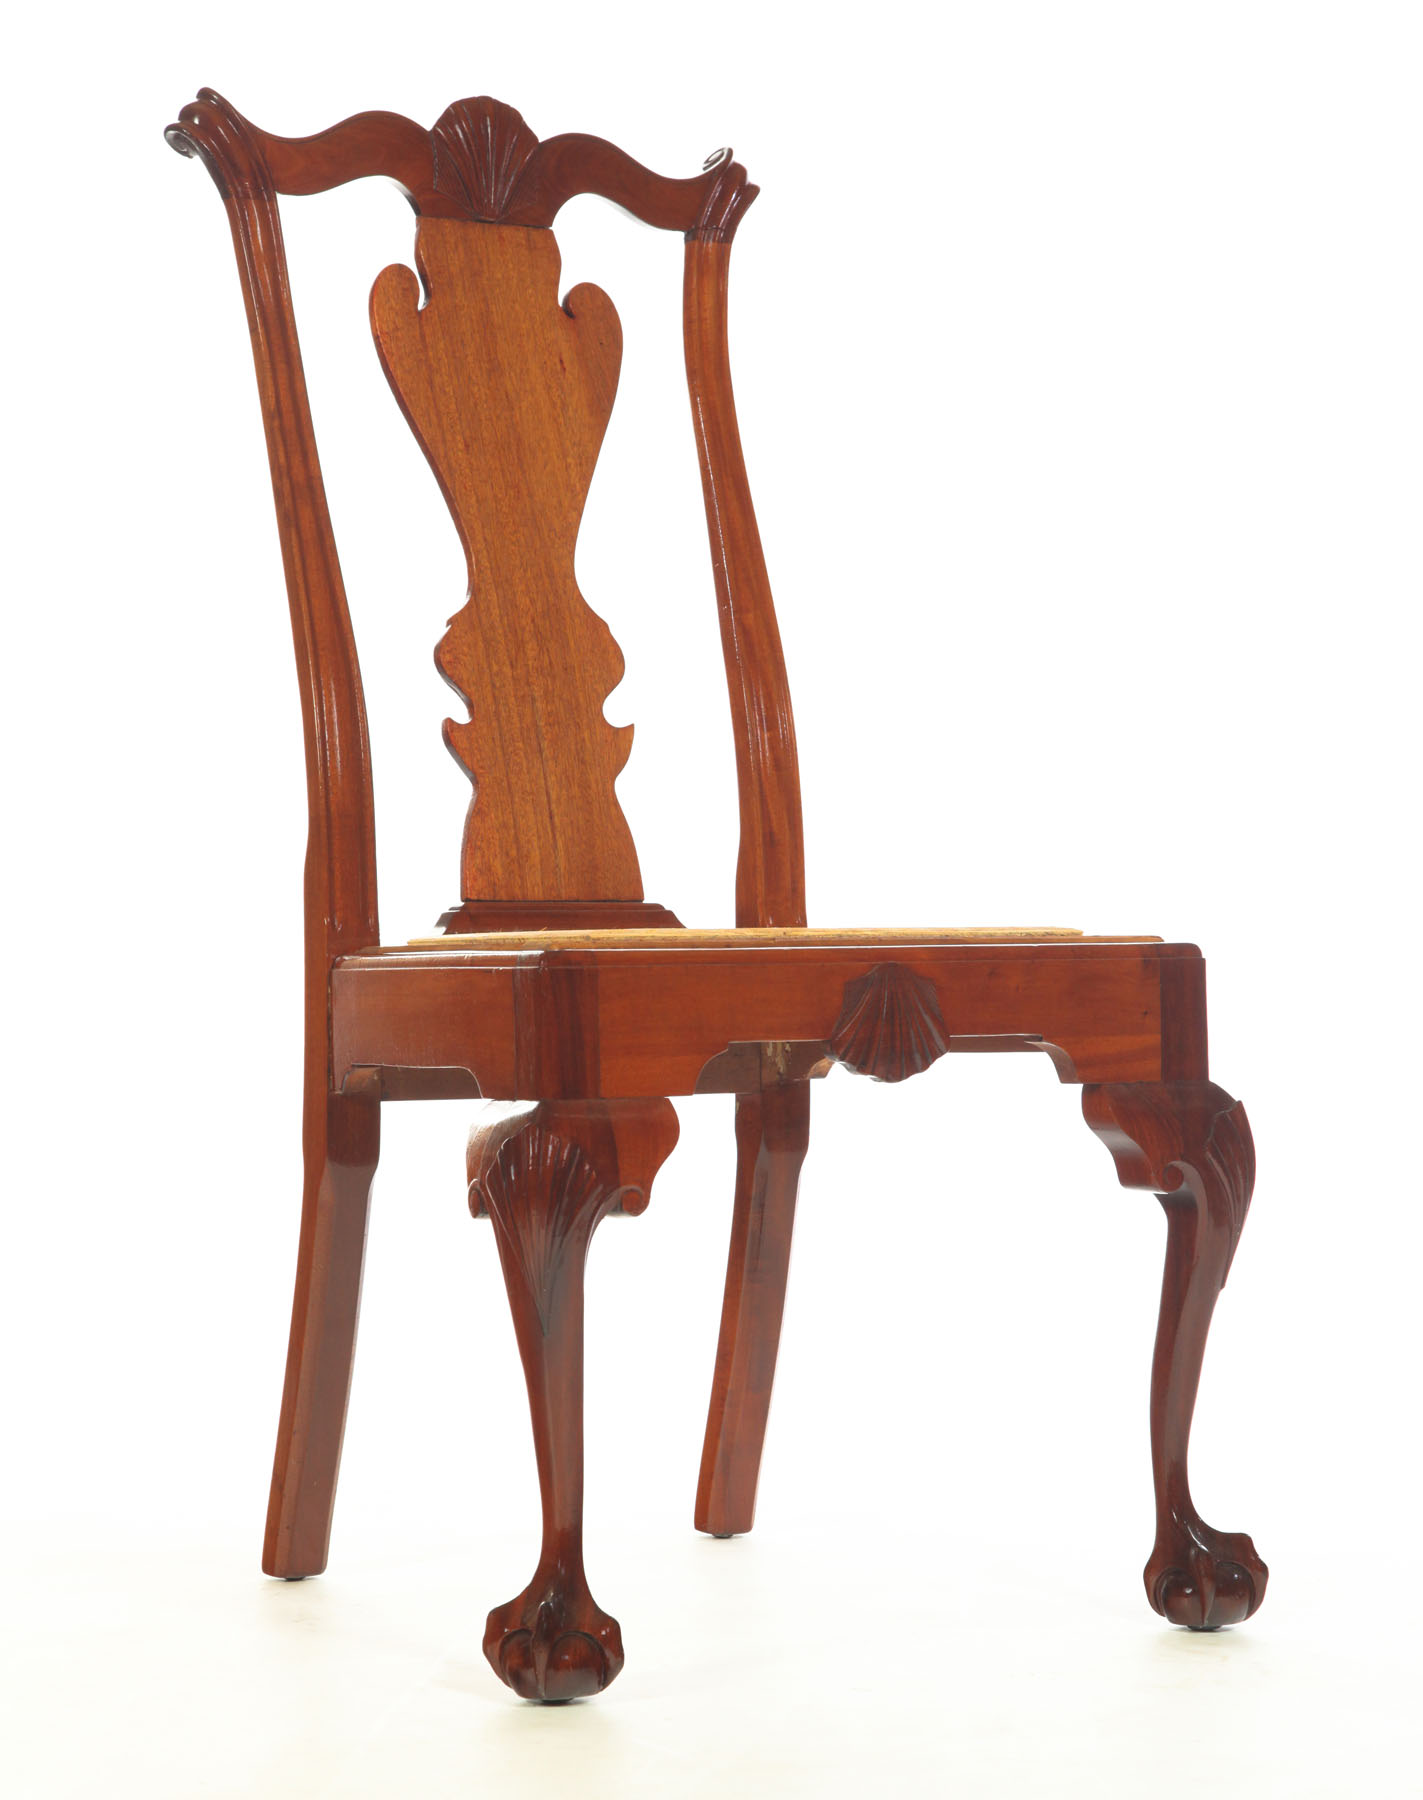 CHIPPENDALE-STYLE SIDE CHAIR. 